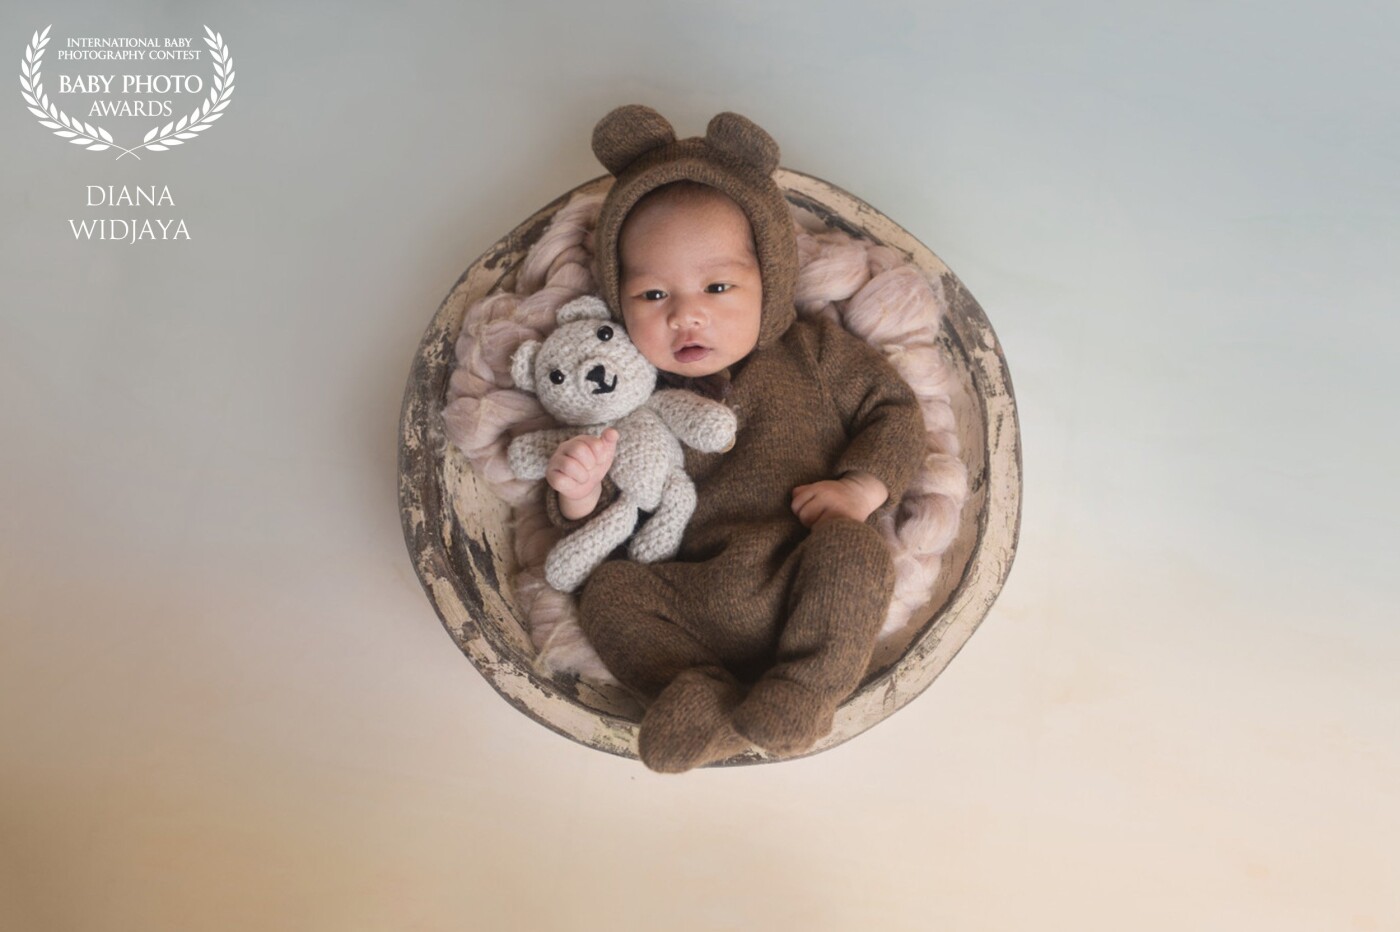 The baby teddy bear is very active during this photoshoot, refused to sleep. But still, we capture his wide-awake eyes. He finally asleep after the last sessions and time for his milk.